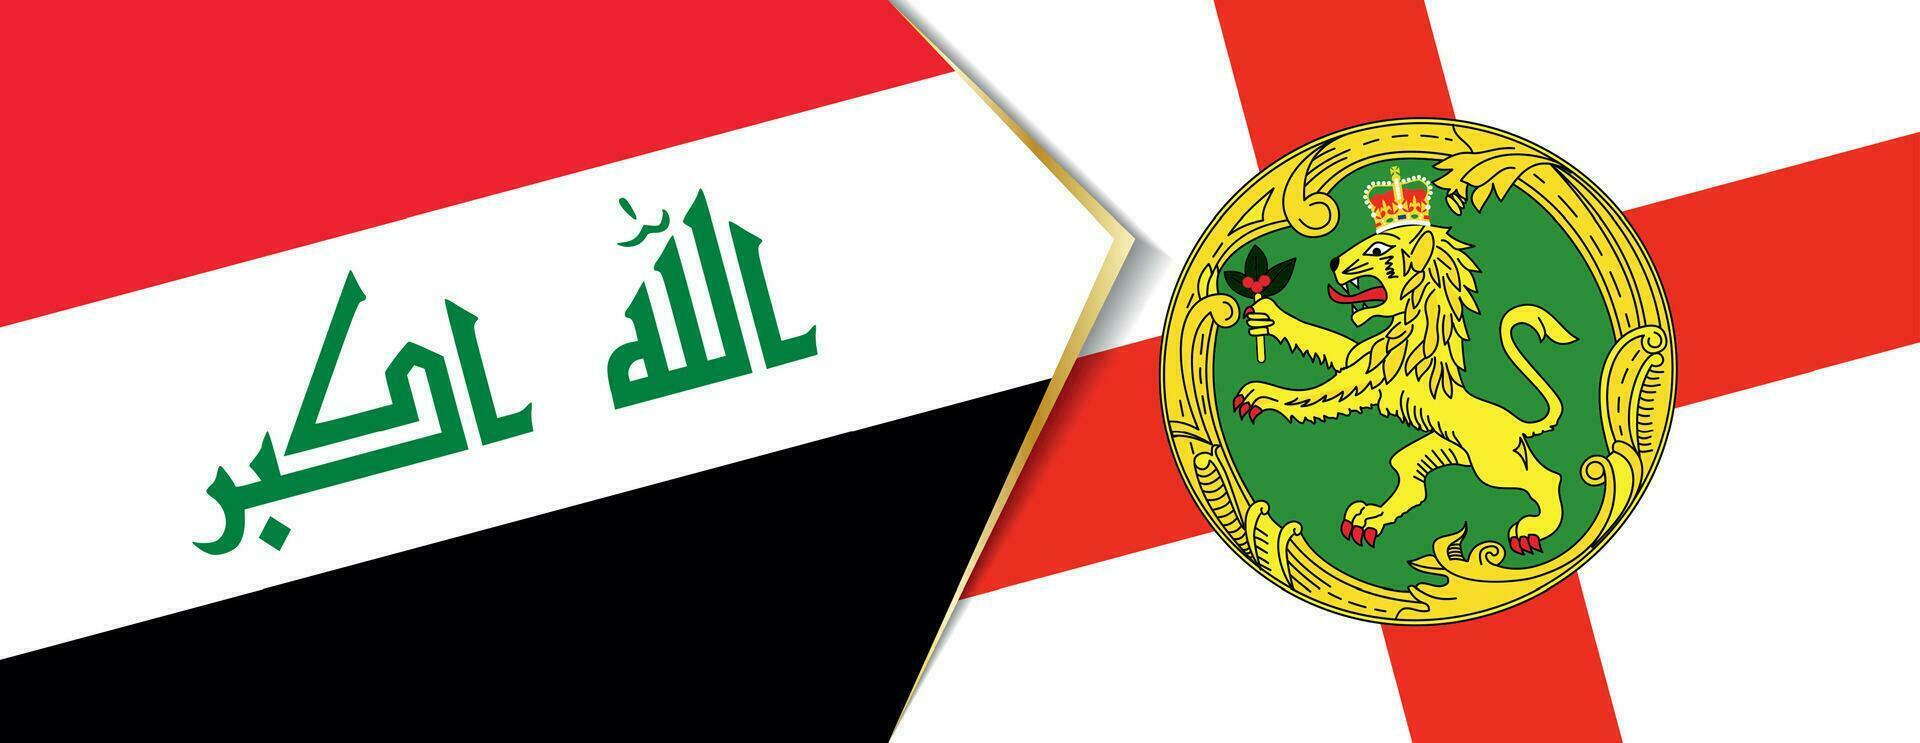 Iraq and Alderney flags, two vector flags.